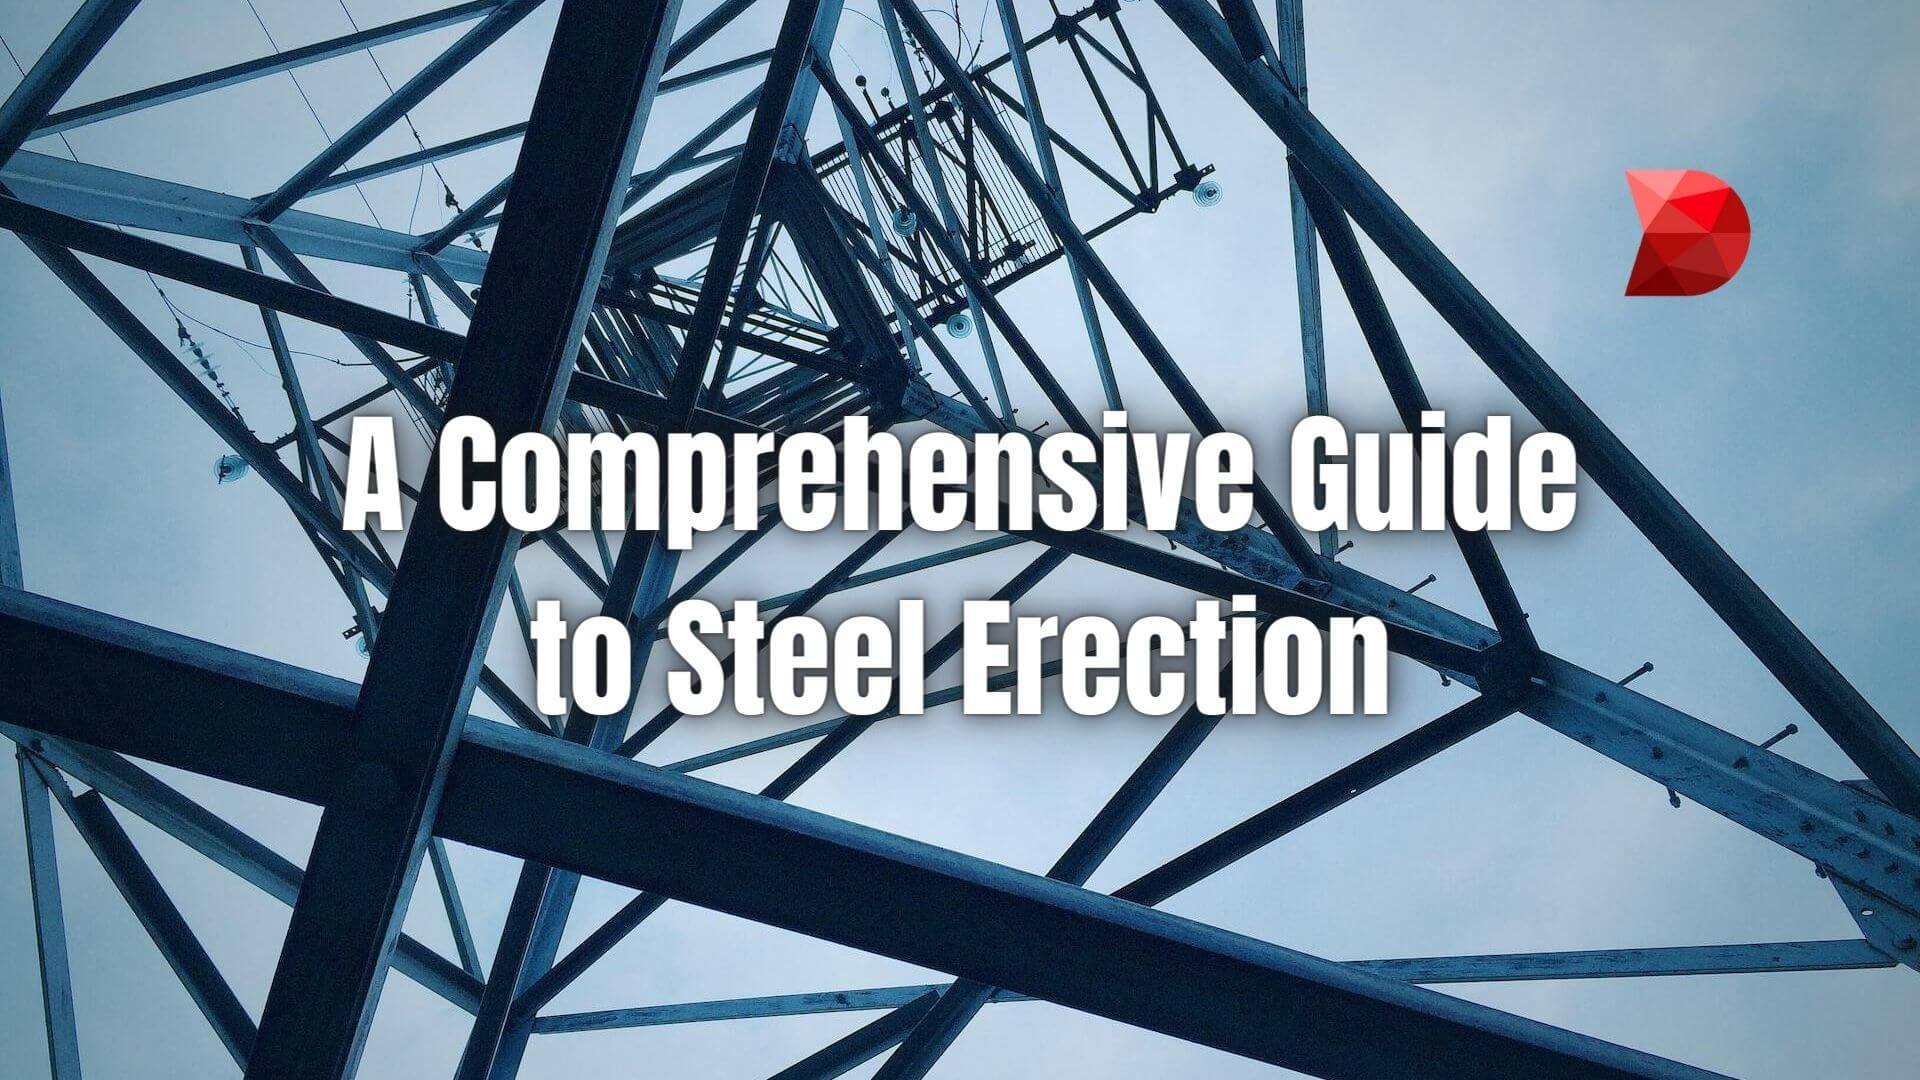 Unlock the secrets of safe and efficient steel structure erection. Click here to learn the industry's best practices and safety tips today!